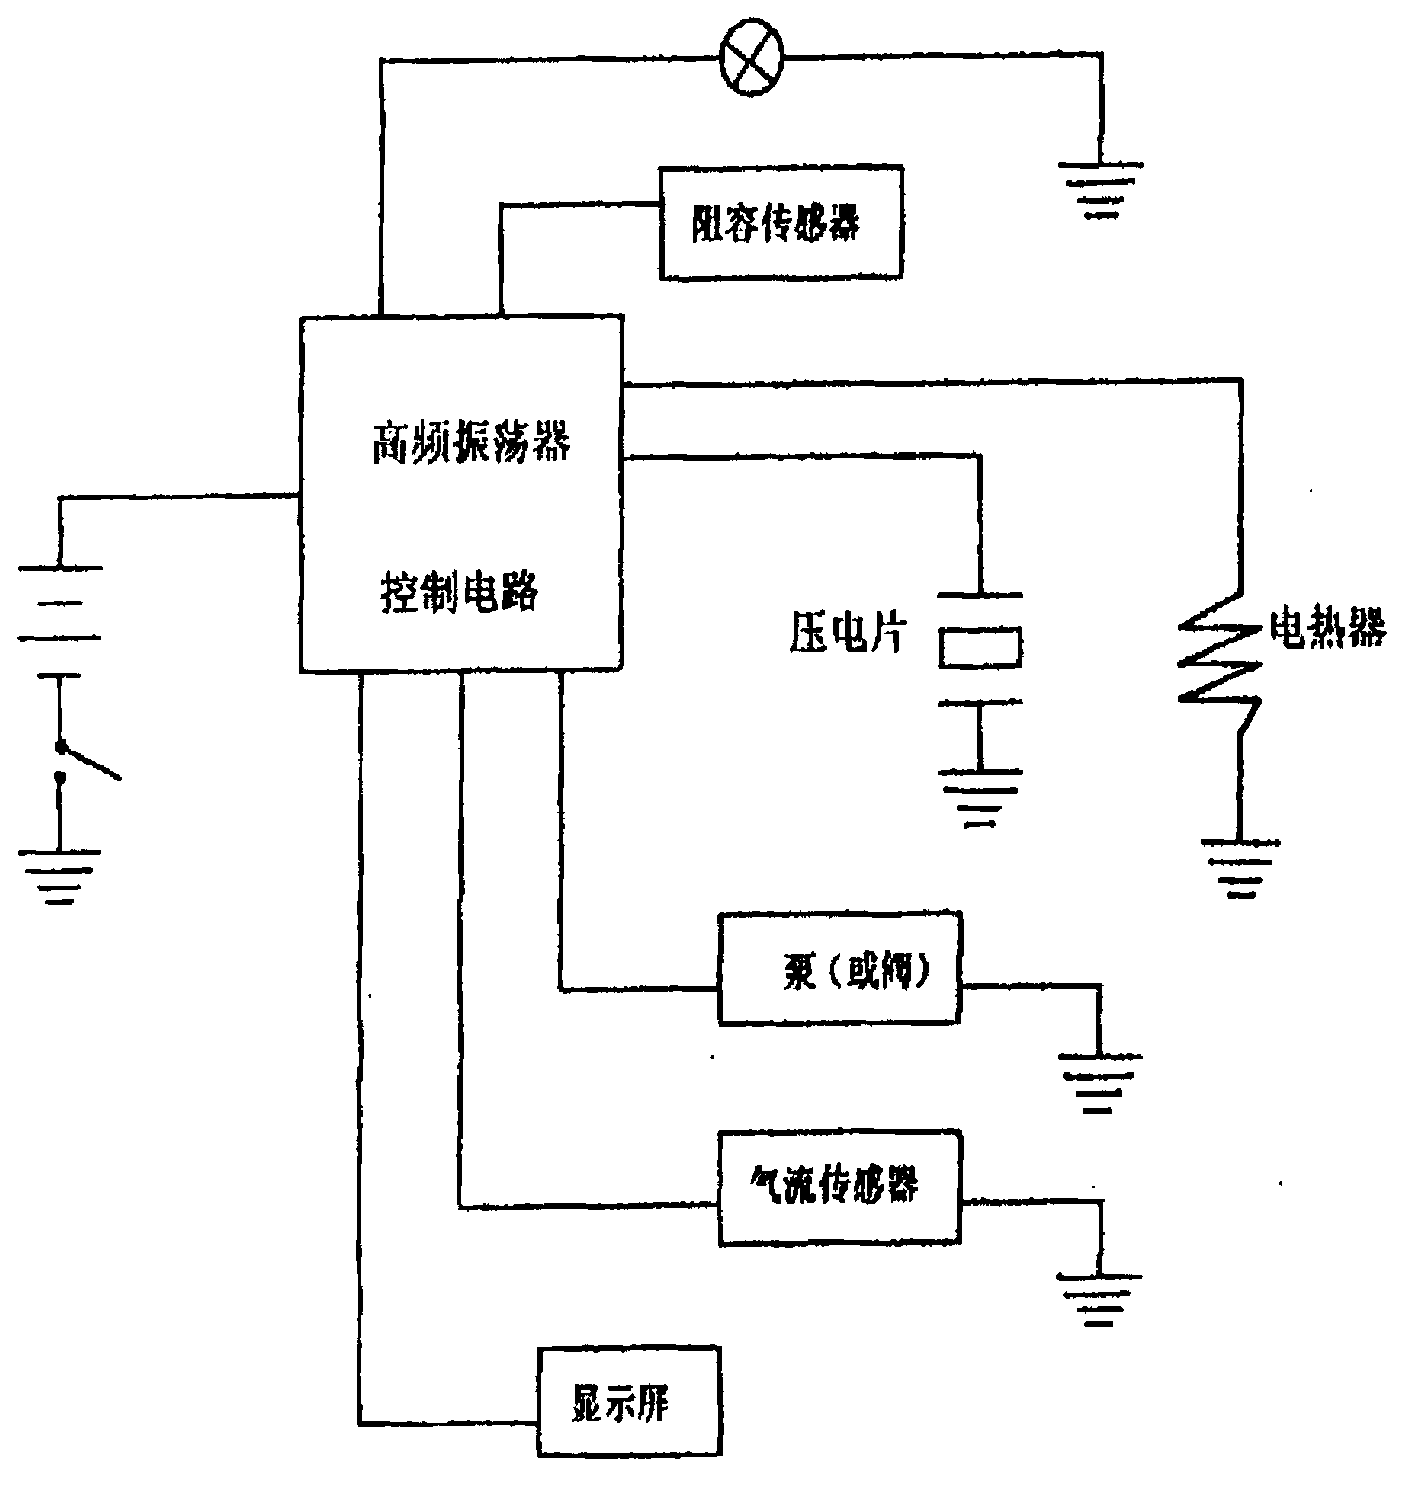 Electronic cigarette control device and method for achieving visualized man-machine interaction